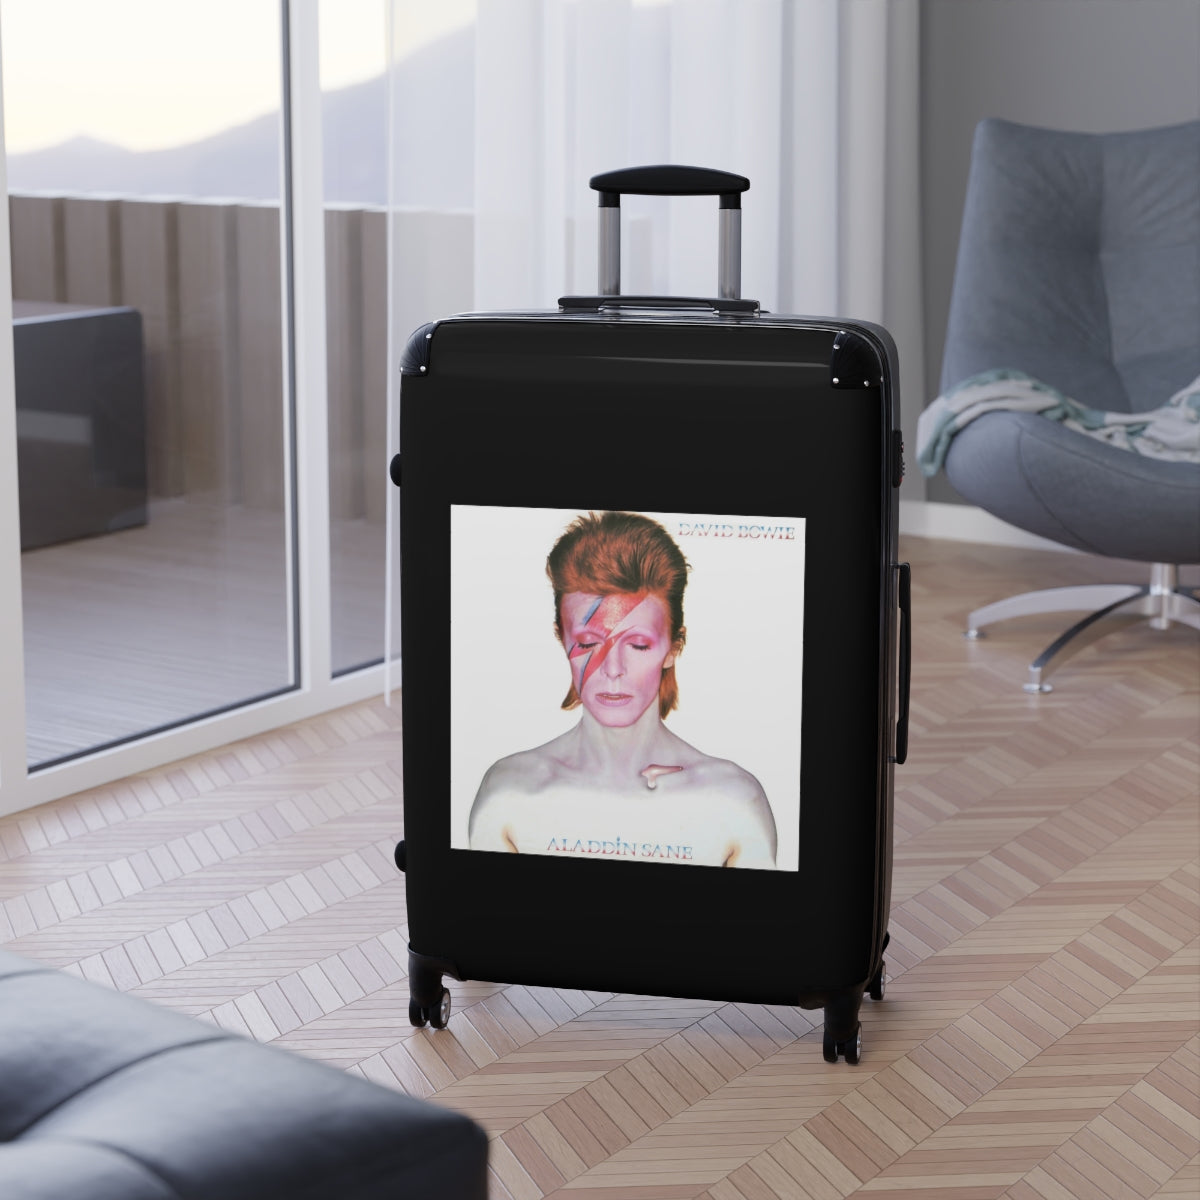 Getrott David Bowie Aladdin Sane 1973 Black Cabin Suitcase Extended Storage Adjustable Telescopic Handle Double wheeled Polycarbonate Hard-shell Built-in Lock-Bags-Geotrott